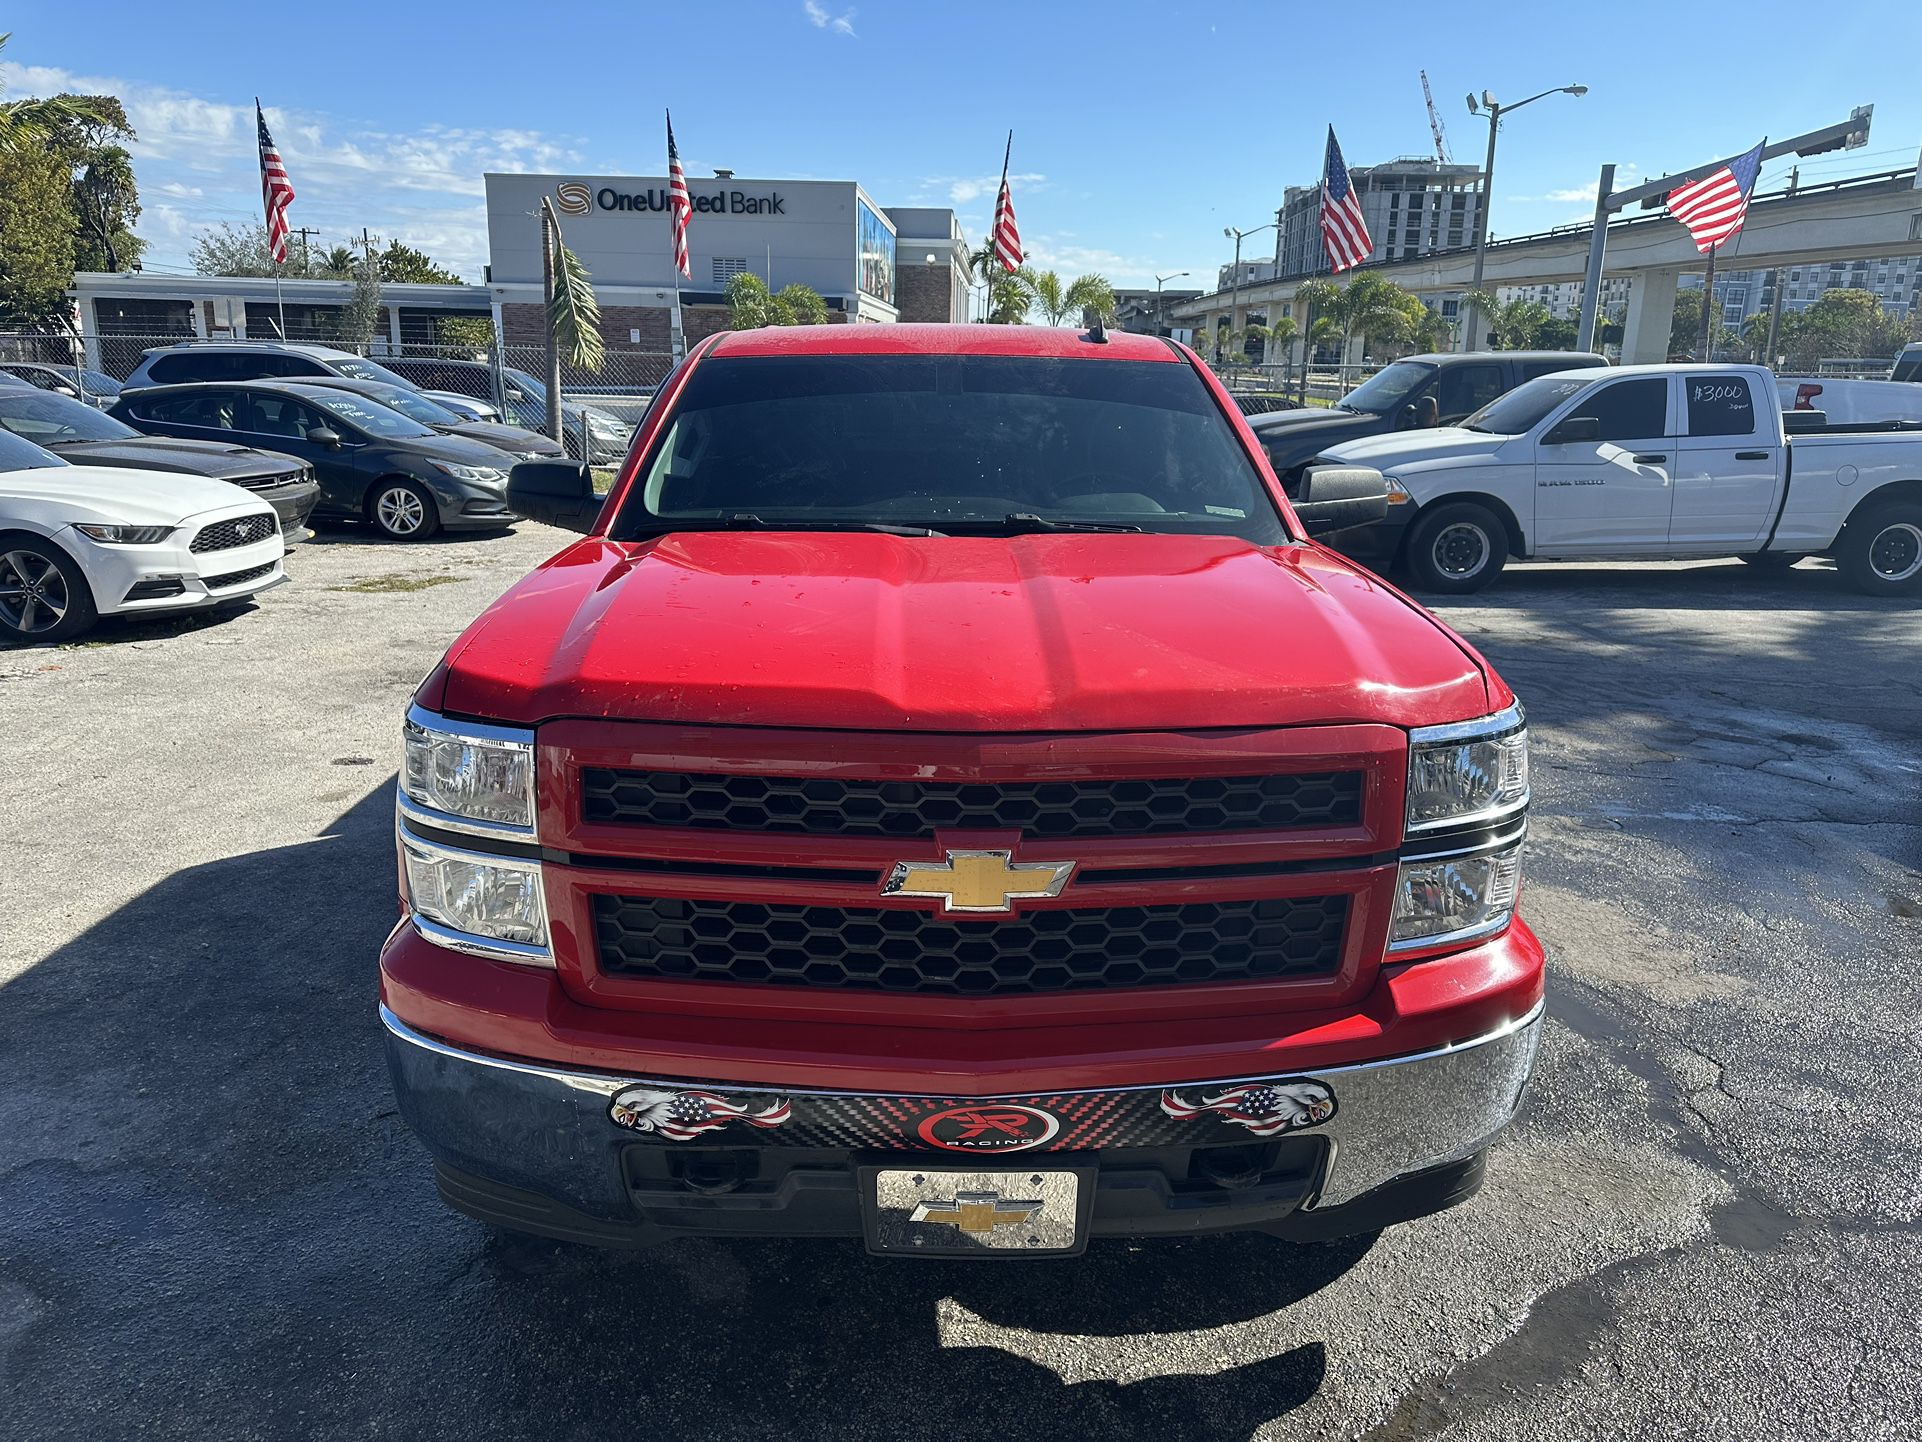 used 2015 chevy silverado - front view 1